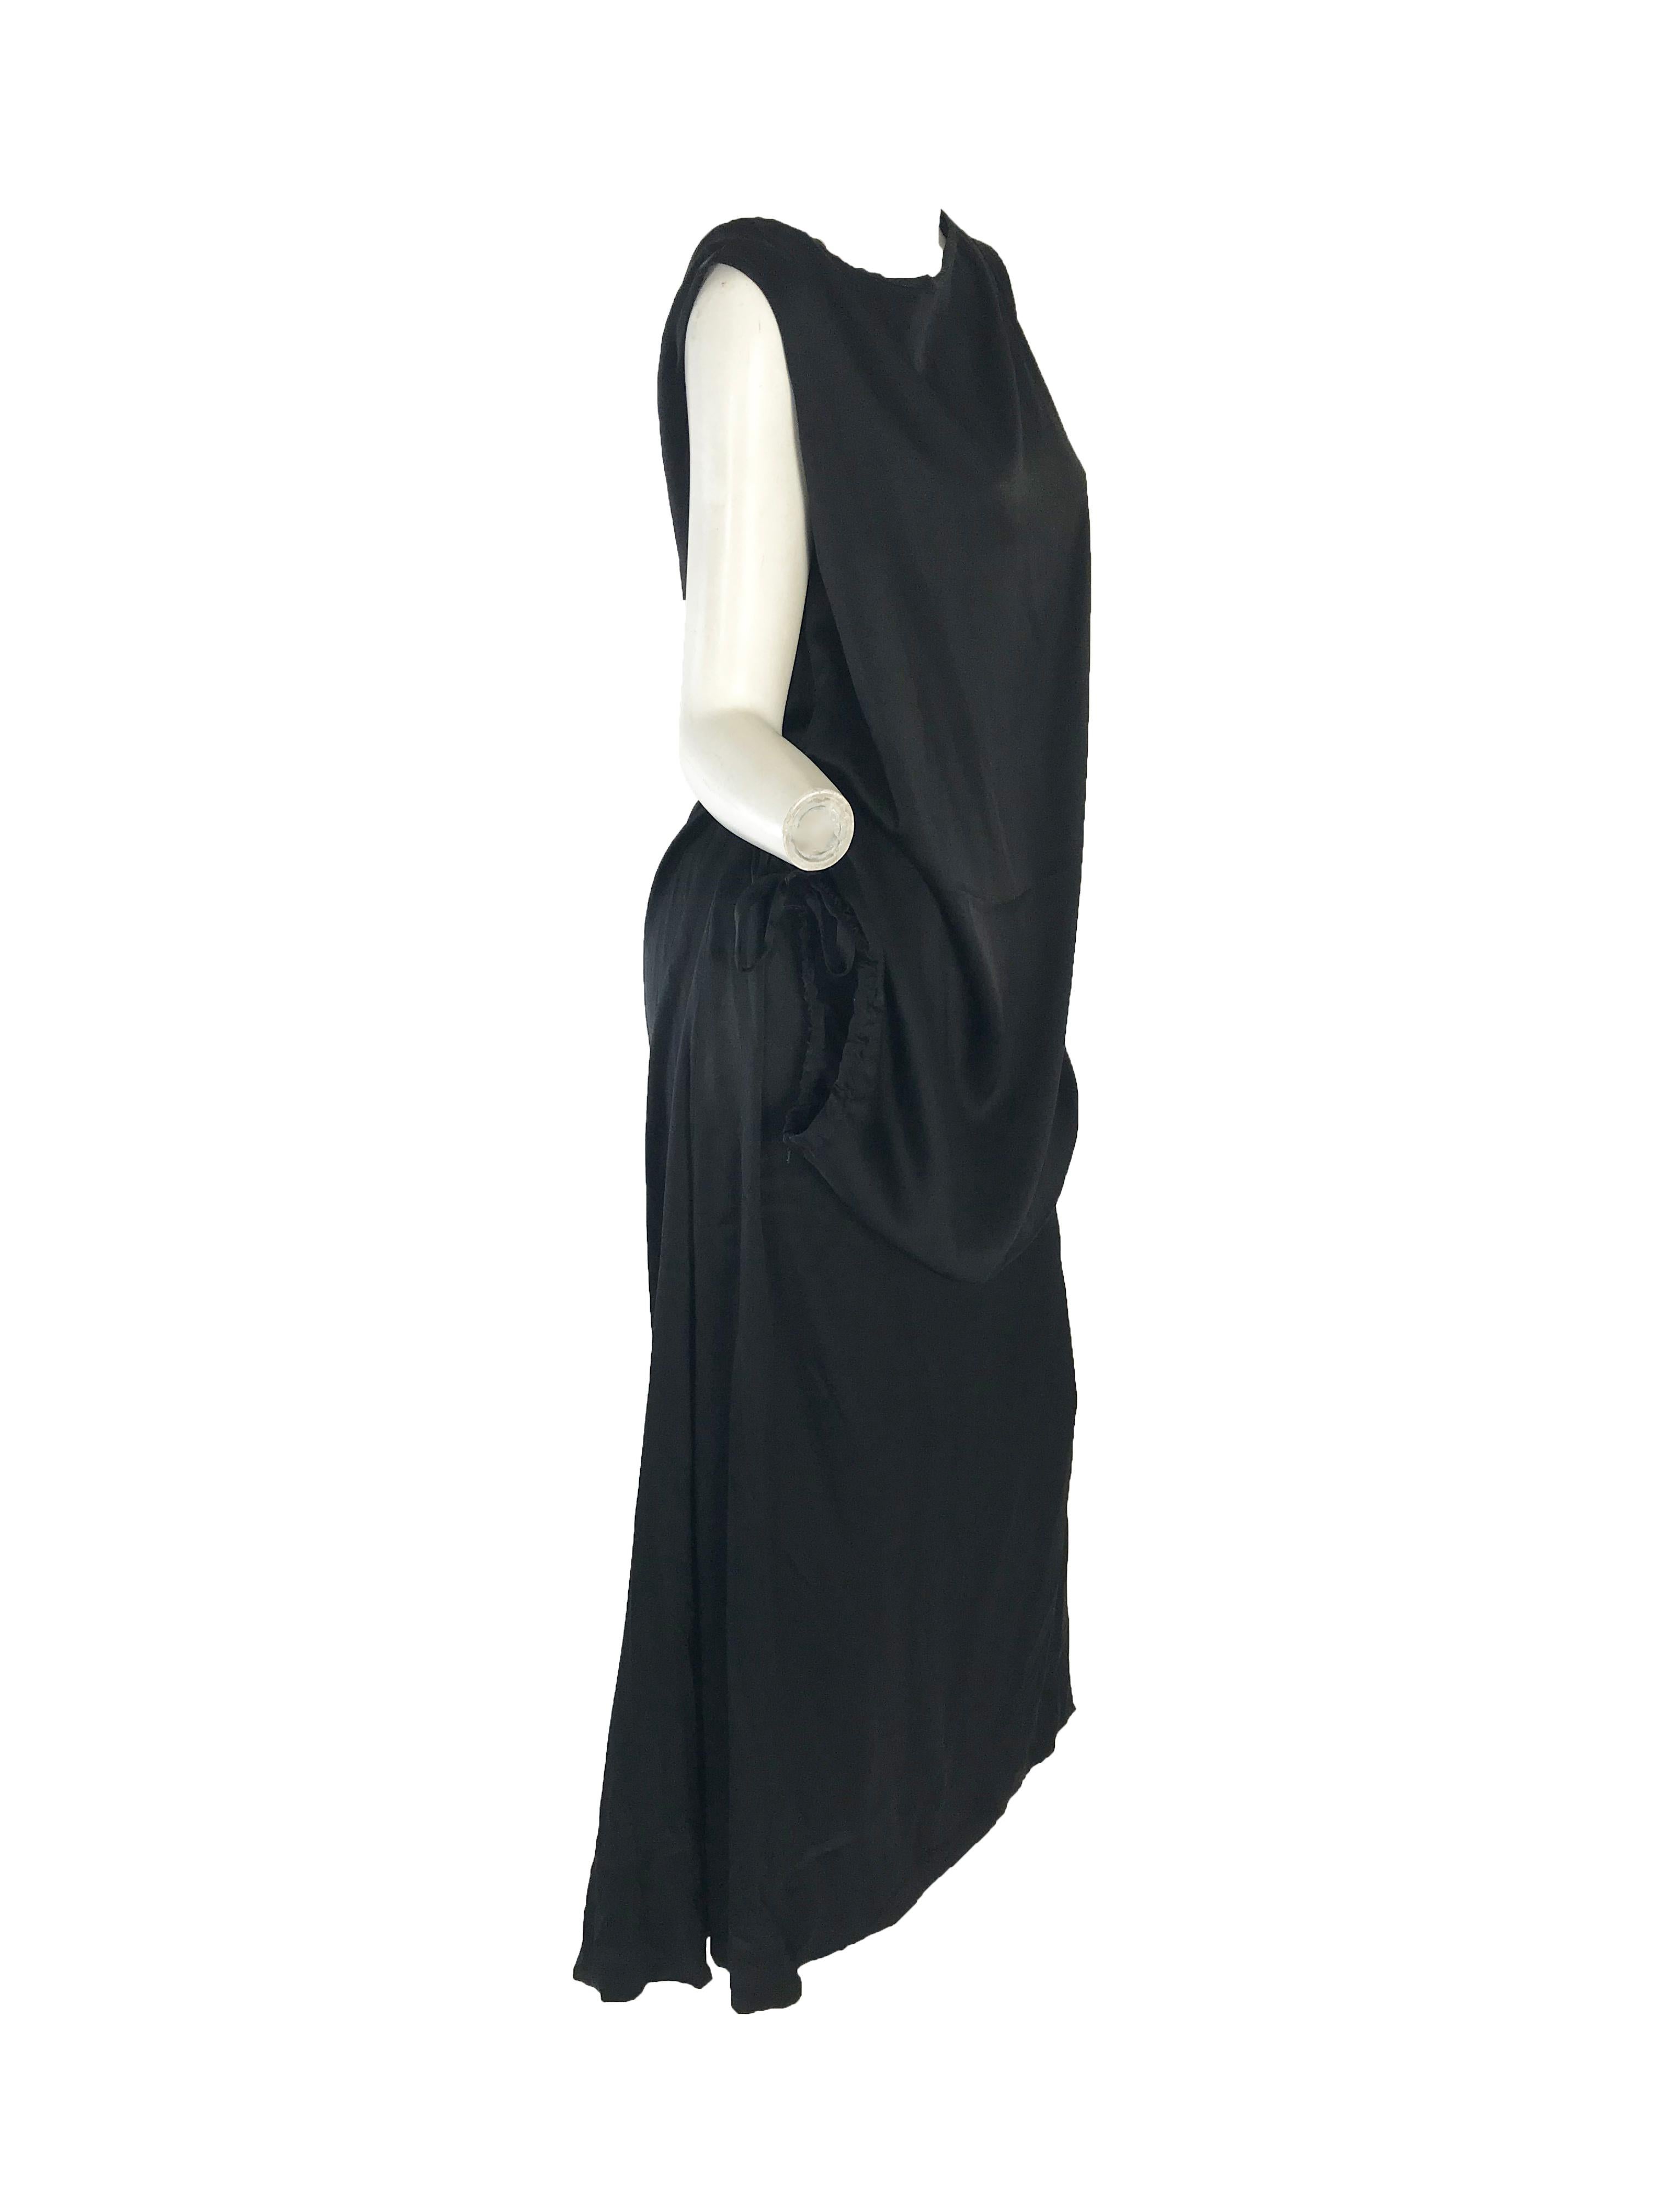 1990s Yohji Yamamoto black sleeveless gown with drawstring interior pouch, creating a front pouch. 

Made in Japan
Condition: Excellent
Size Med